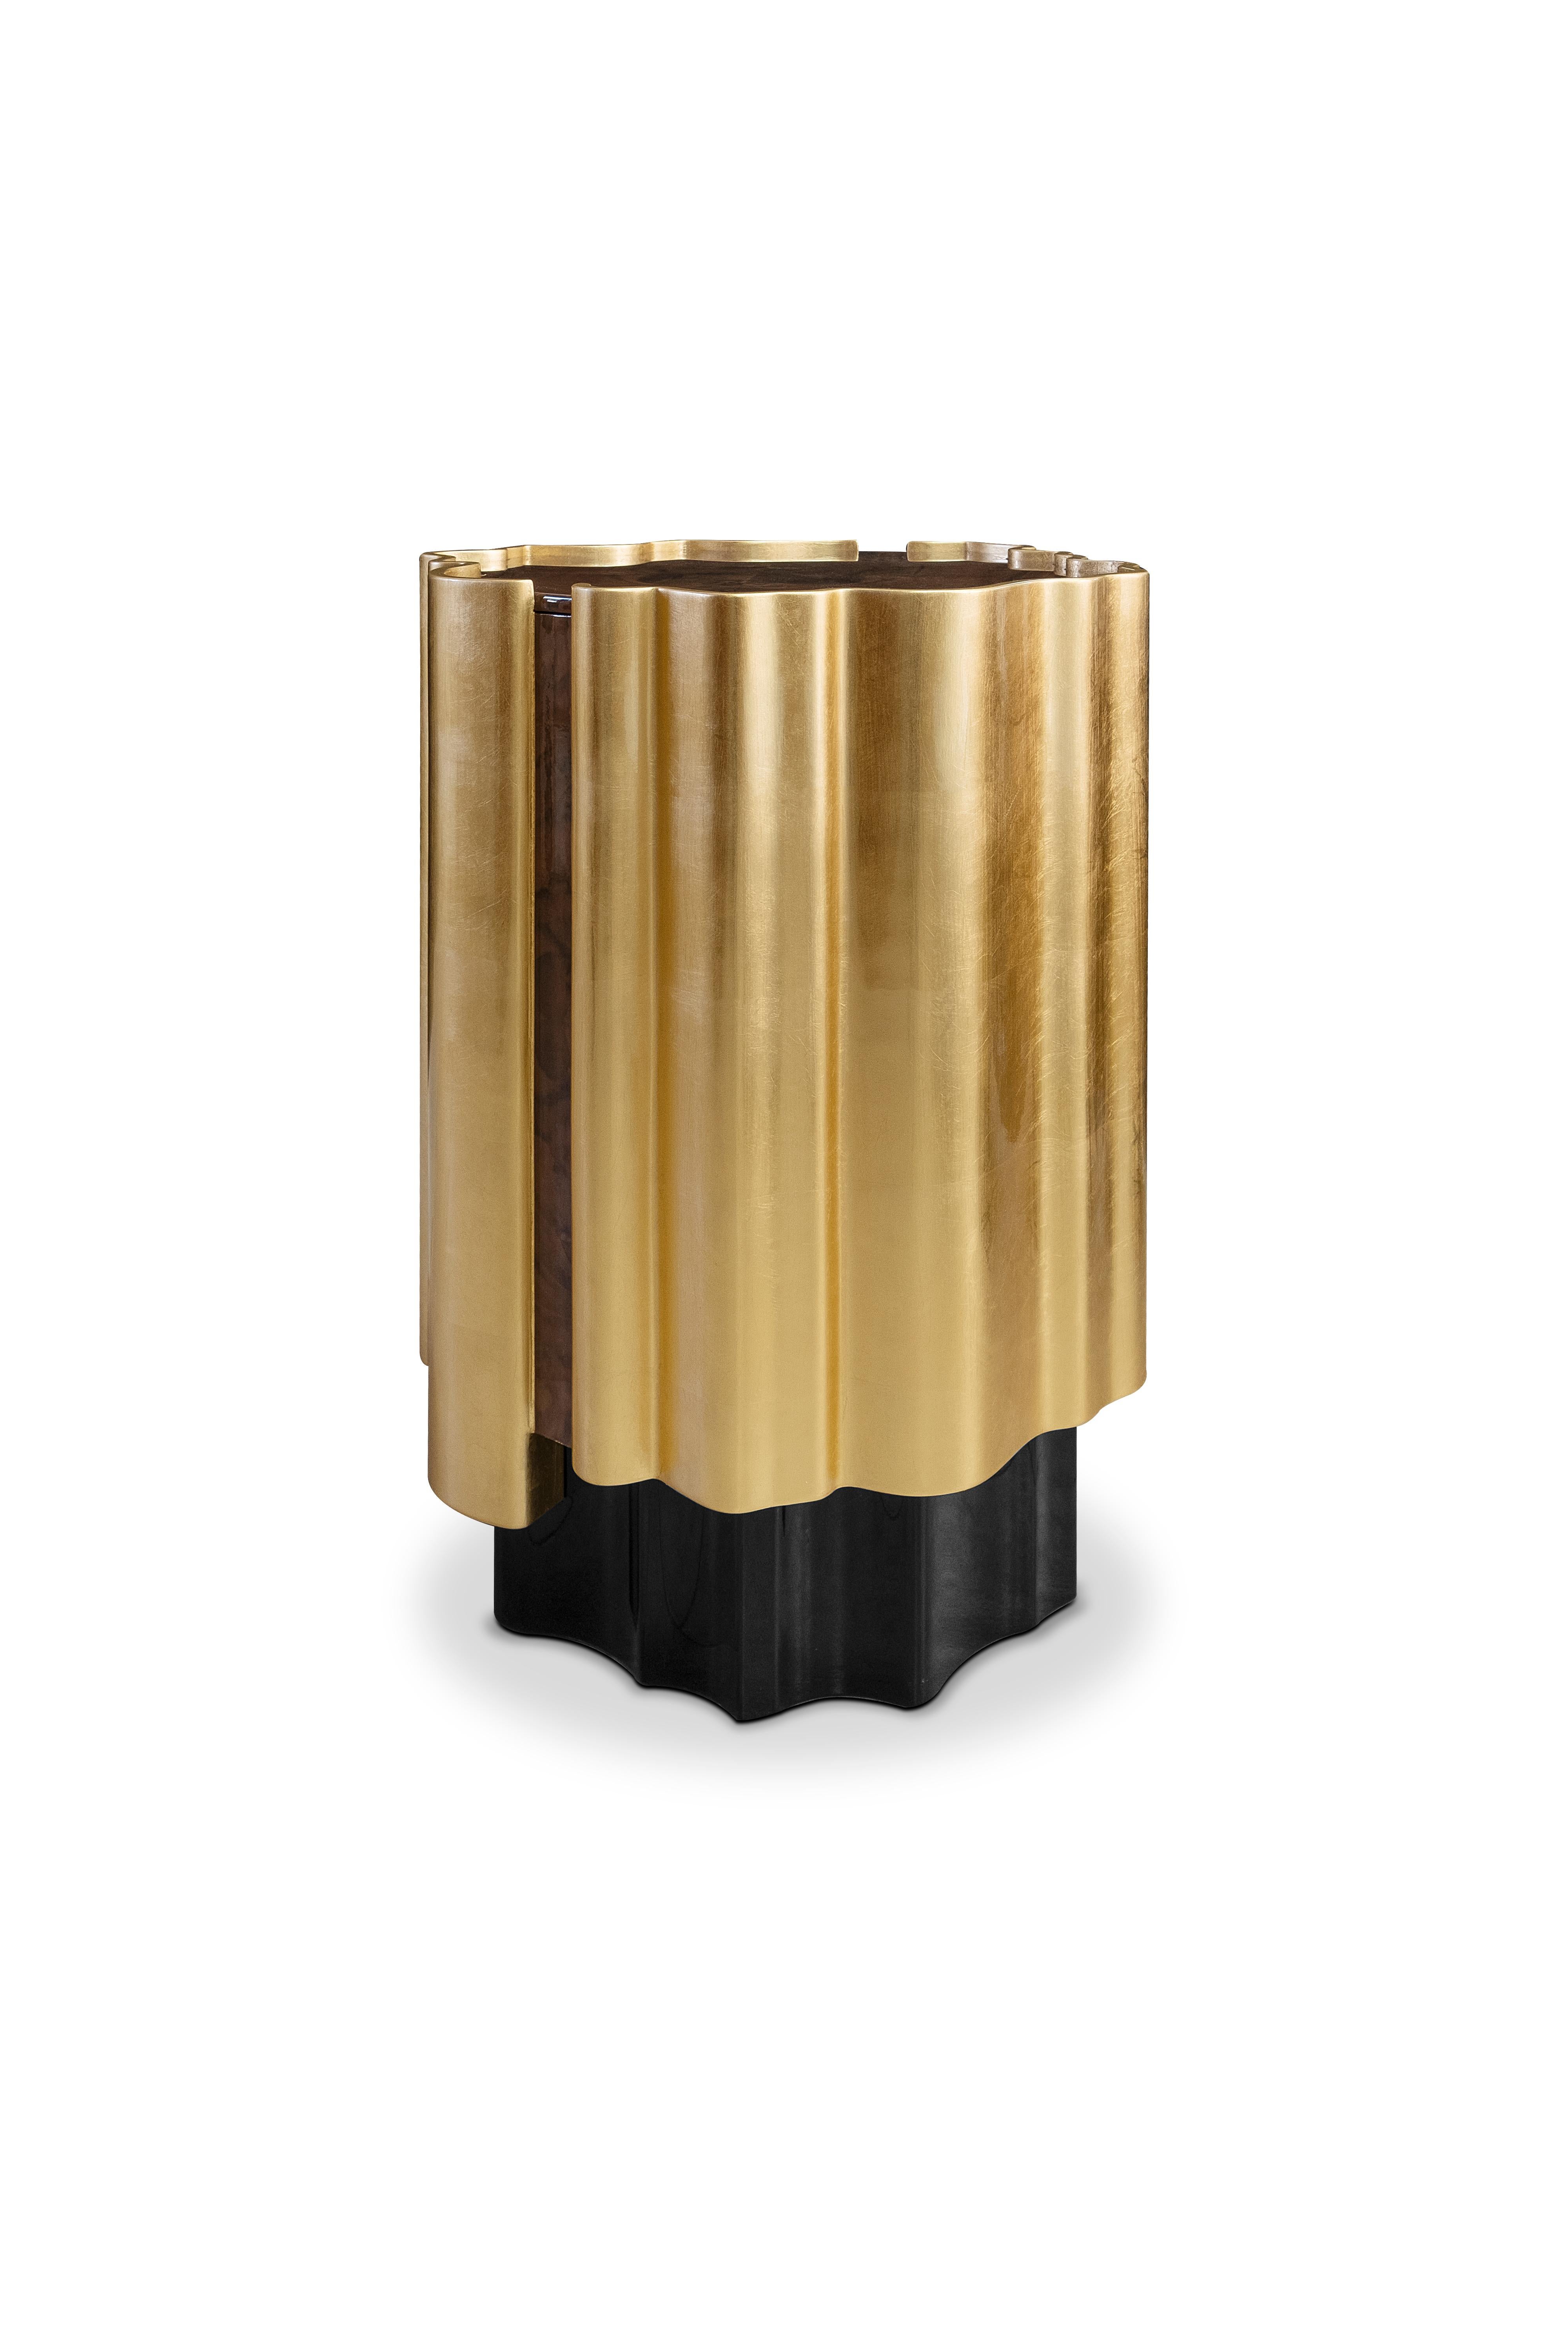 Portuguese 21st Century Horizon Side Table Wood Gold Leaf For Sale